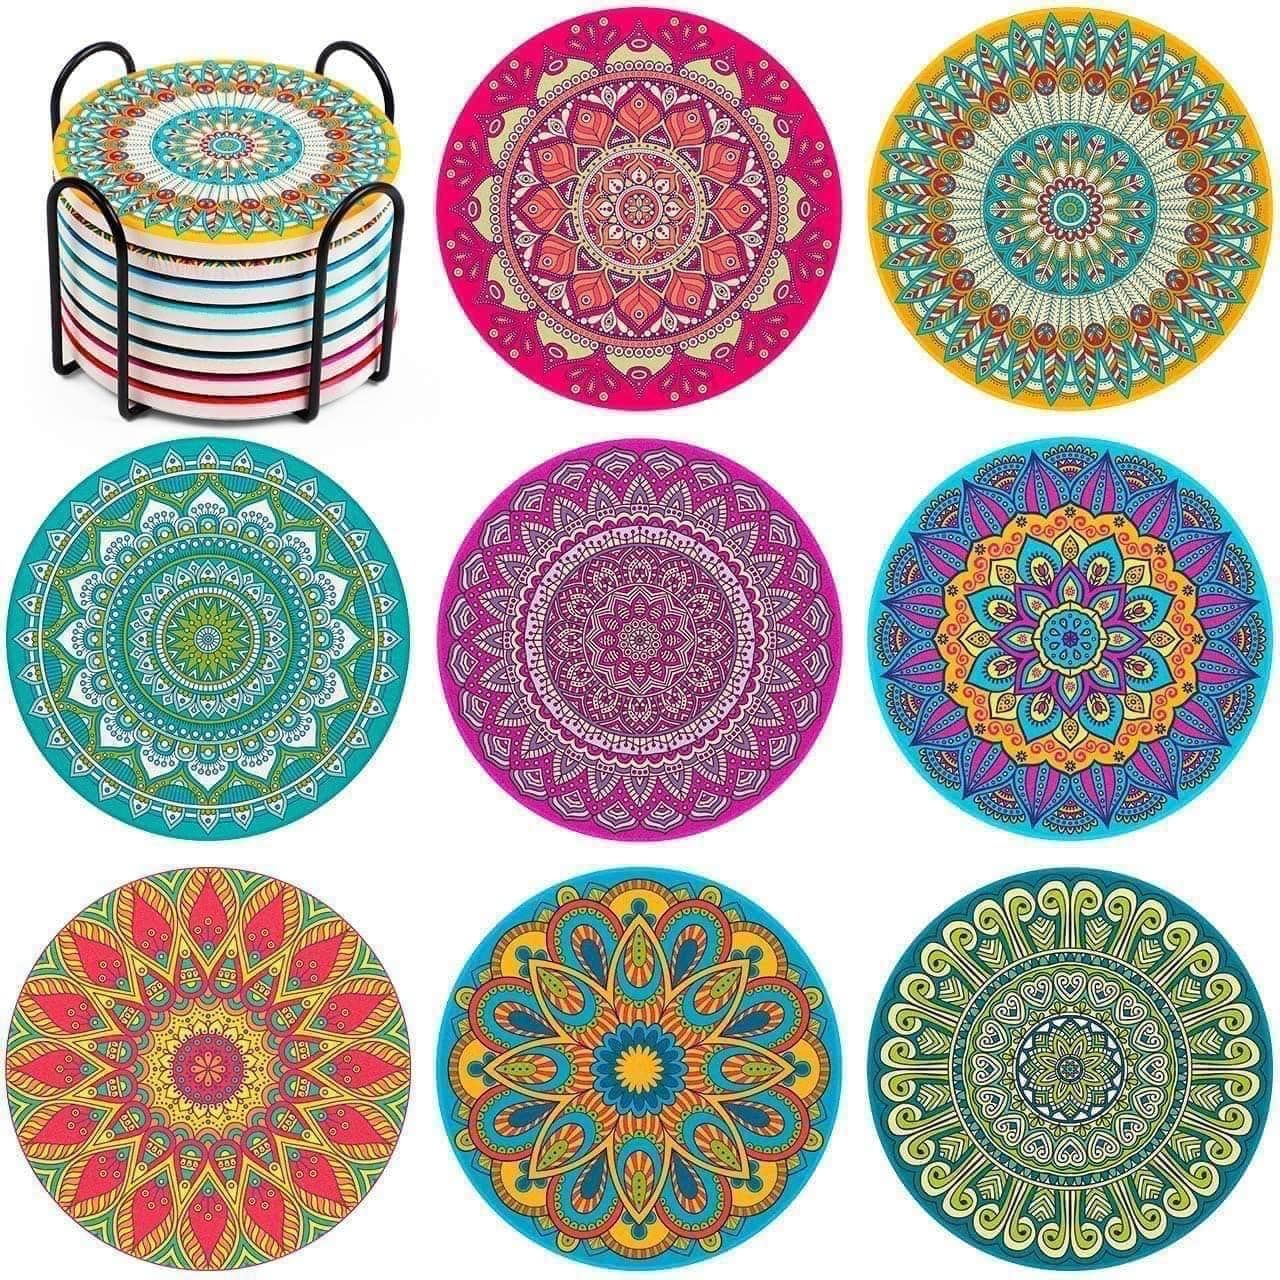 bo lot ly 8 chiec duong kinh 10 4cm innogear coasters coasters for drinks absorbent ceramic